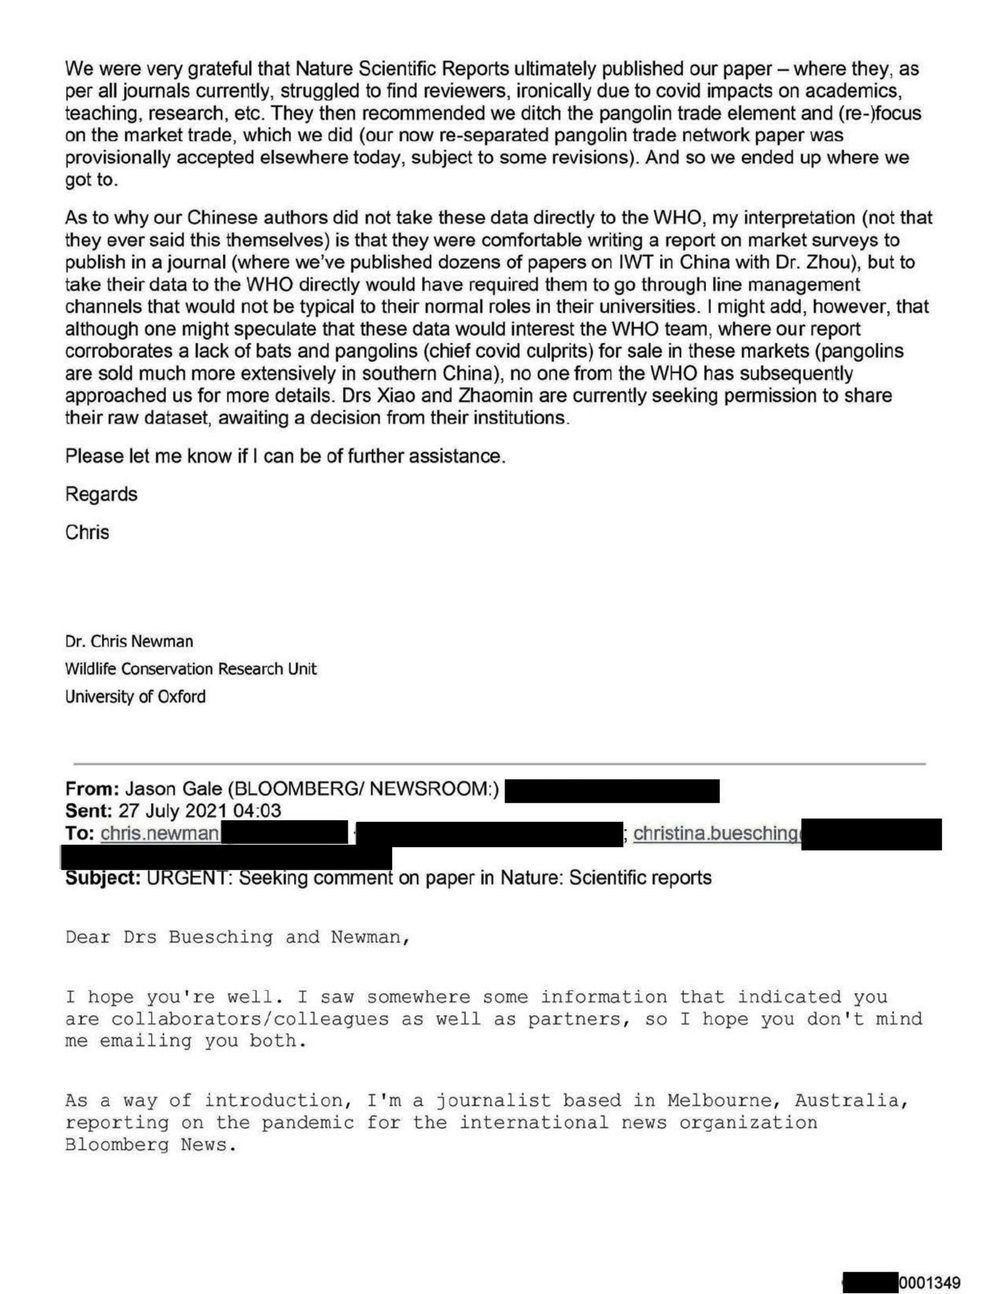 Page 44 from David Morens NIH Emails Redacted